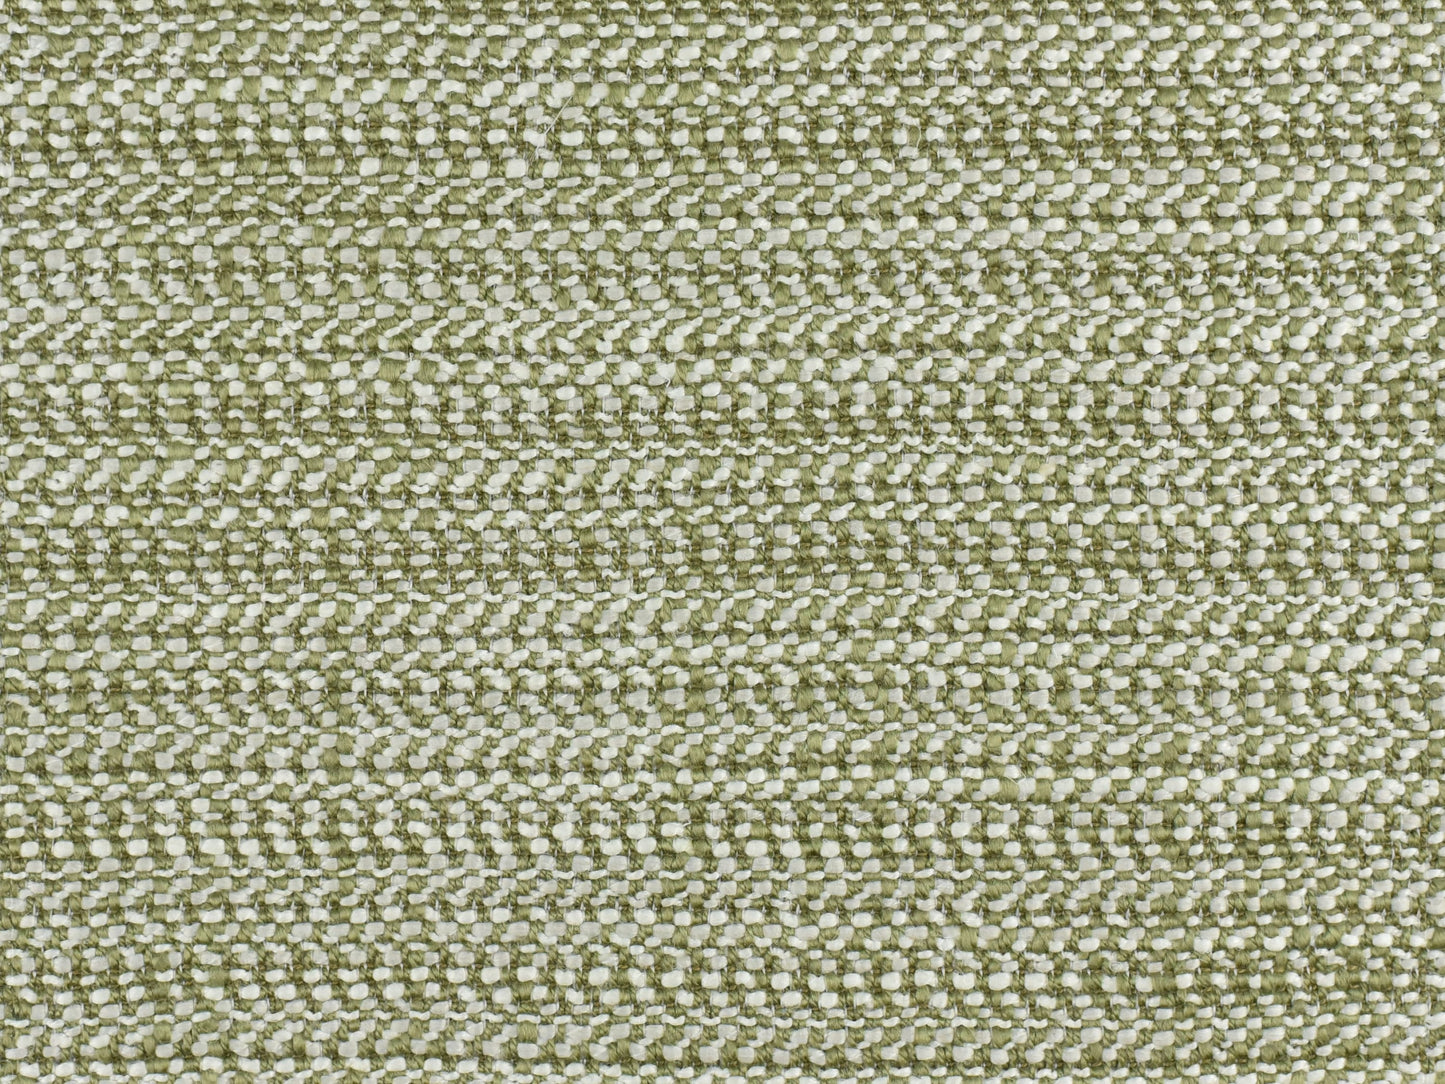 Heavy Duty Linen Blend Strip Woven Design Upholstery Fabric|Linen Fabric By The Yard|Modern Upholstery Fabric For Chair Pillow|57"W/750GSM Olive Haze